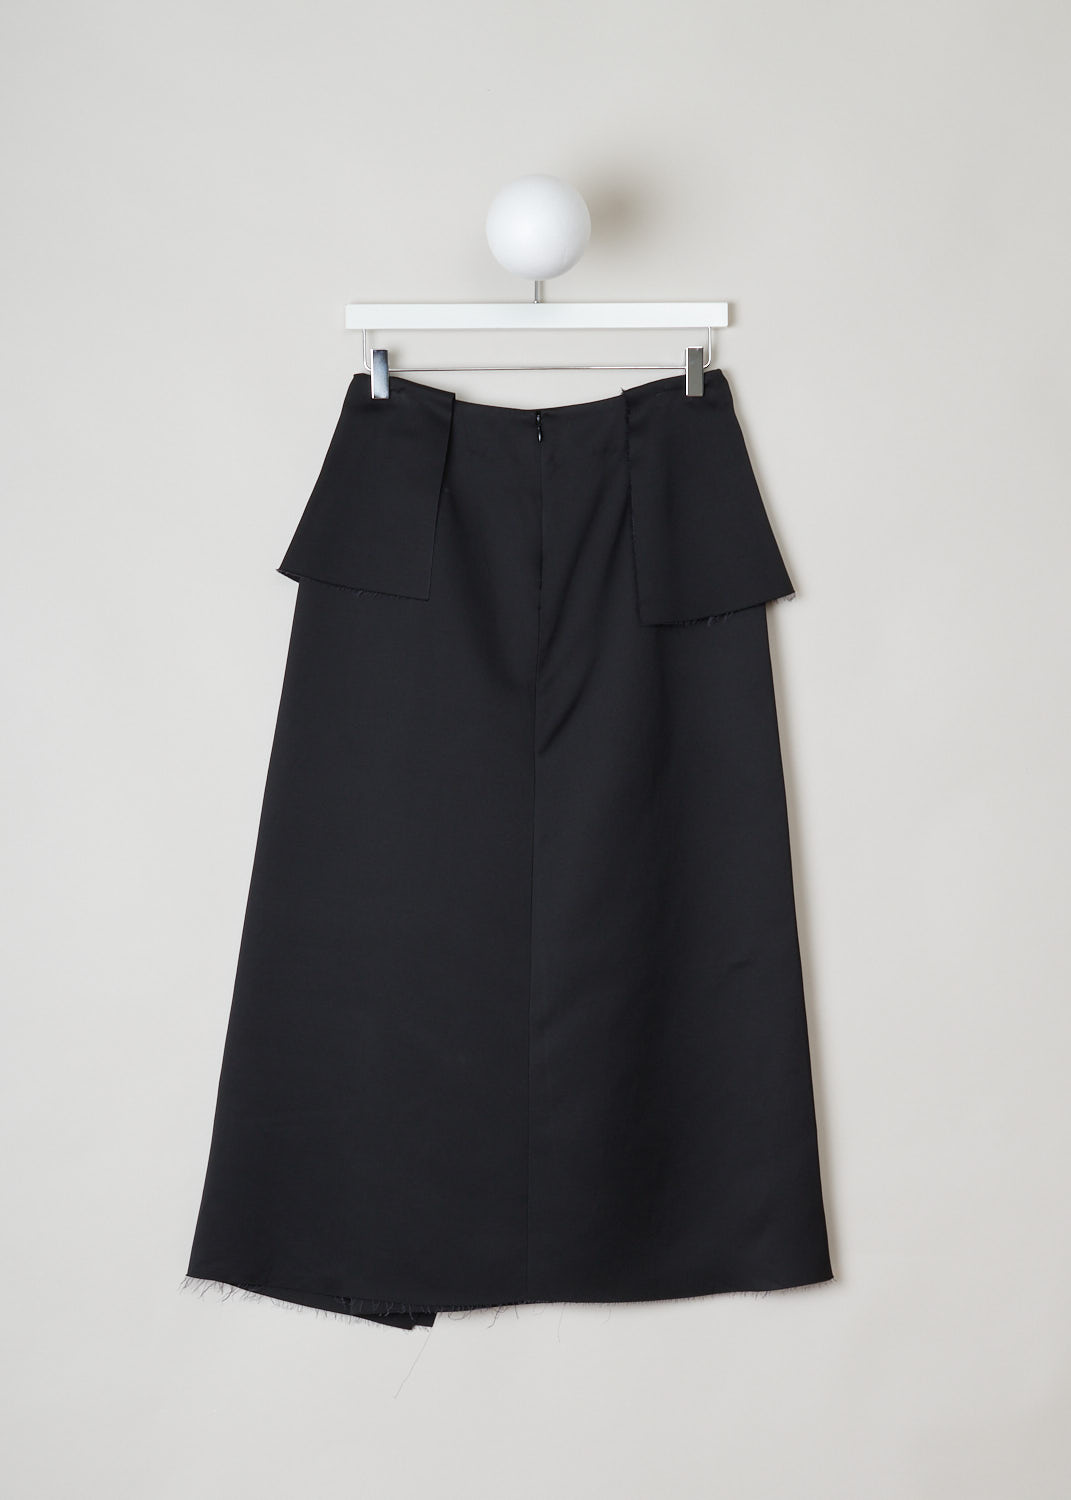 Marni, Black satin A-line skirt, GOMAT64JY0_TSD60_00N99_black, black, back, Black a-line skirt crafted from satin fabric. All the edges of the fabric are frilled and unfinished, featuring similarities with a wrap skirt. Furthermore a concealed zip fastening can be found on the back. 